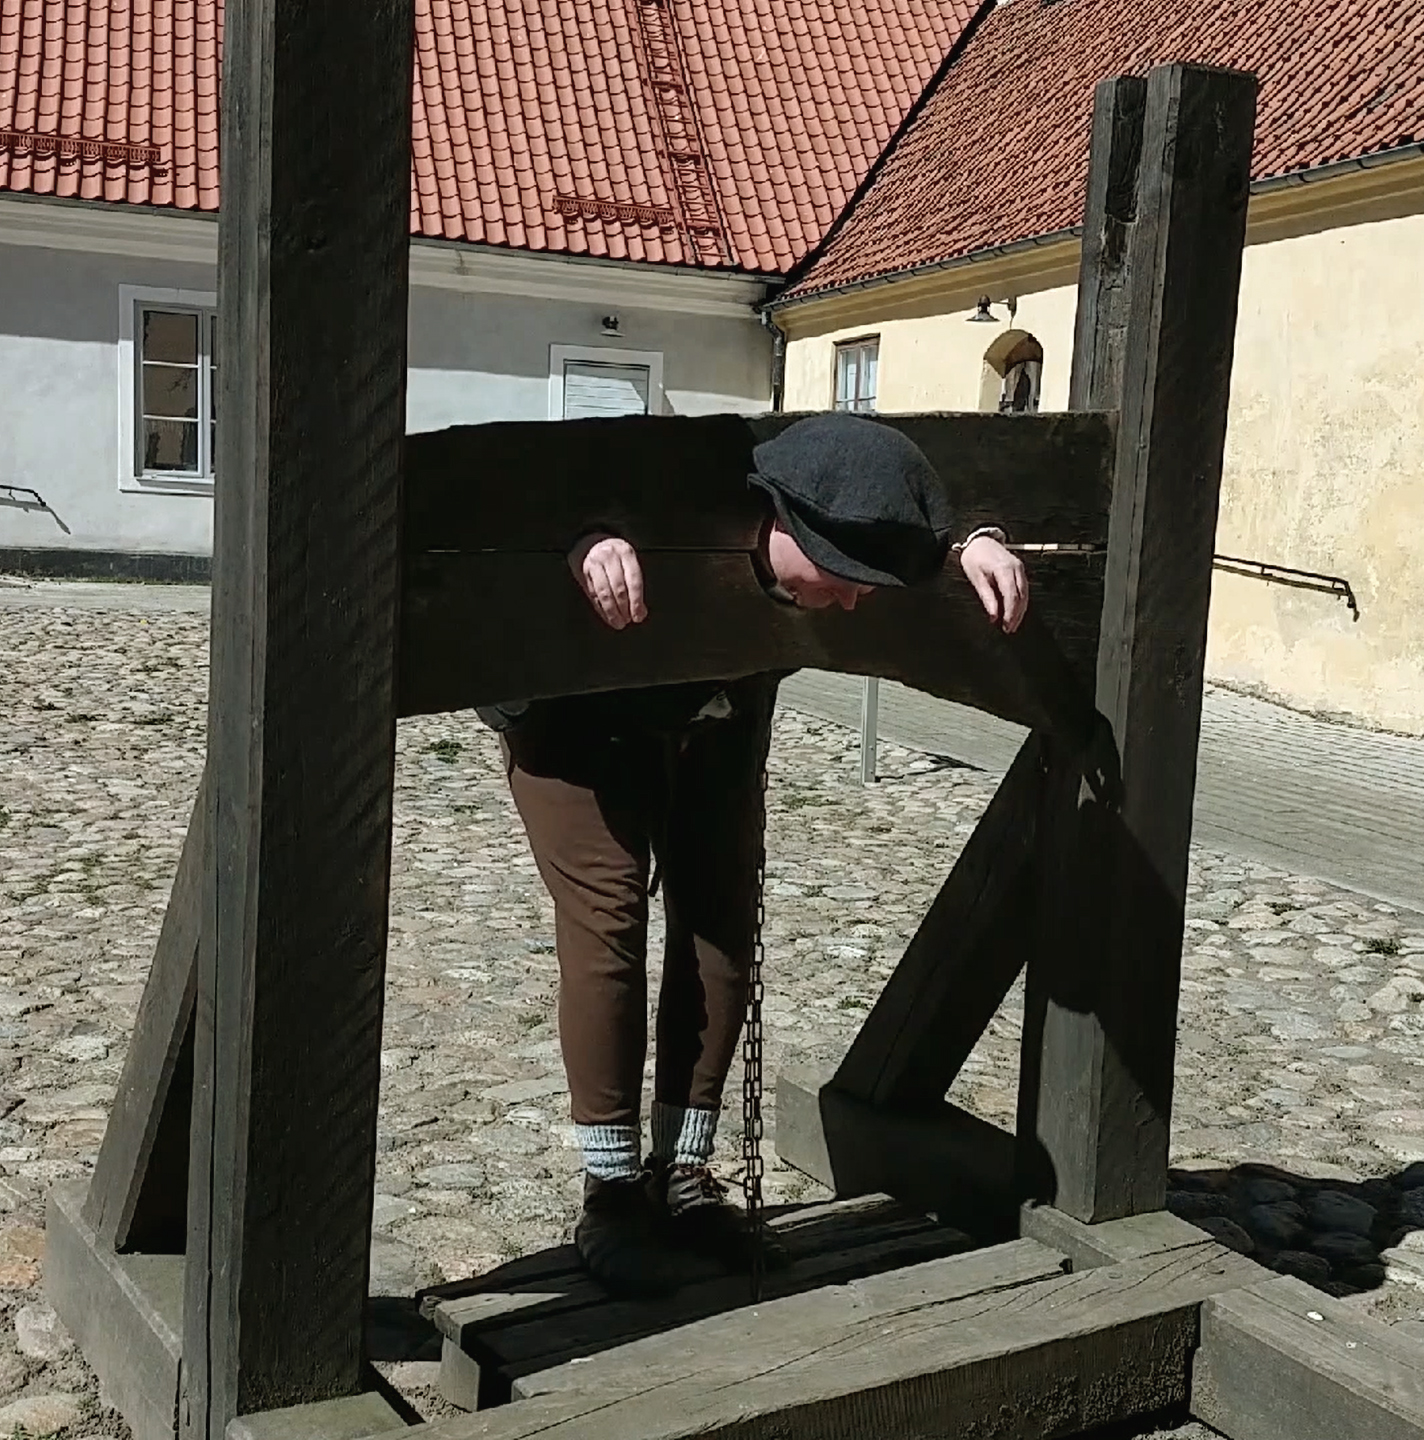 A man in medieval costume locked in the pillory in the castle yard. He is stuck with his hands and head in the log of wood. He has brown pants and a black cap.